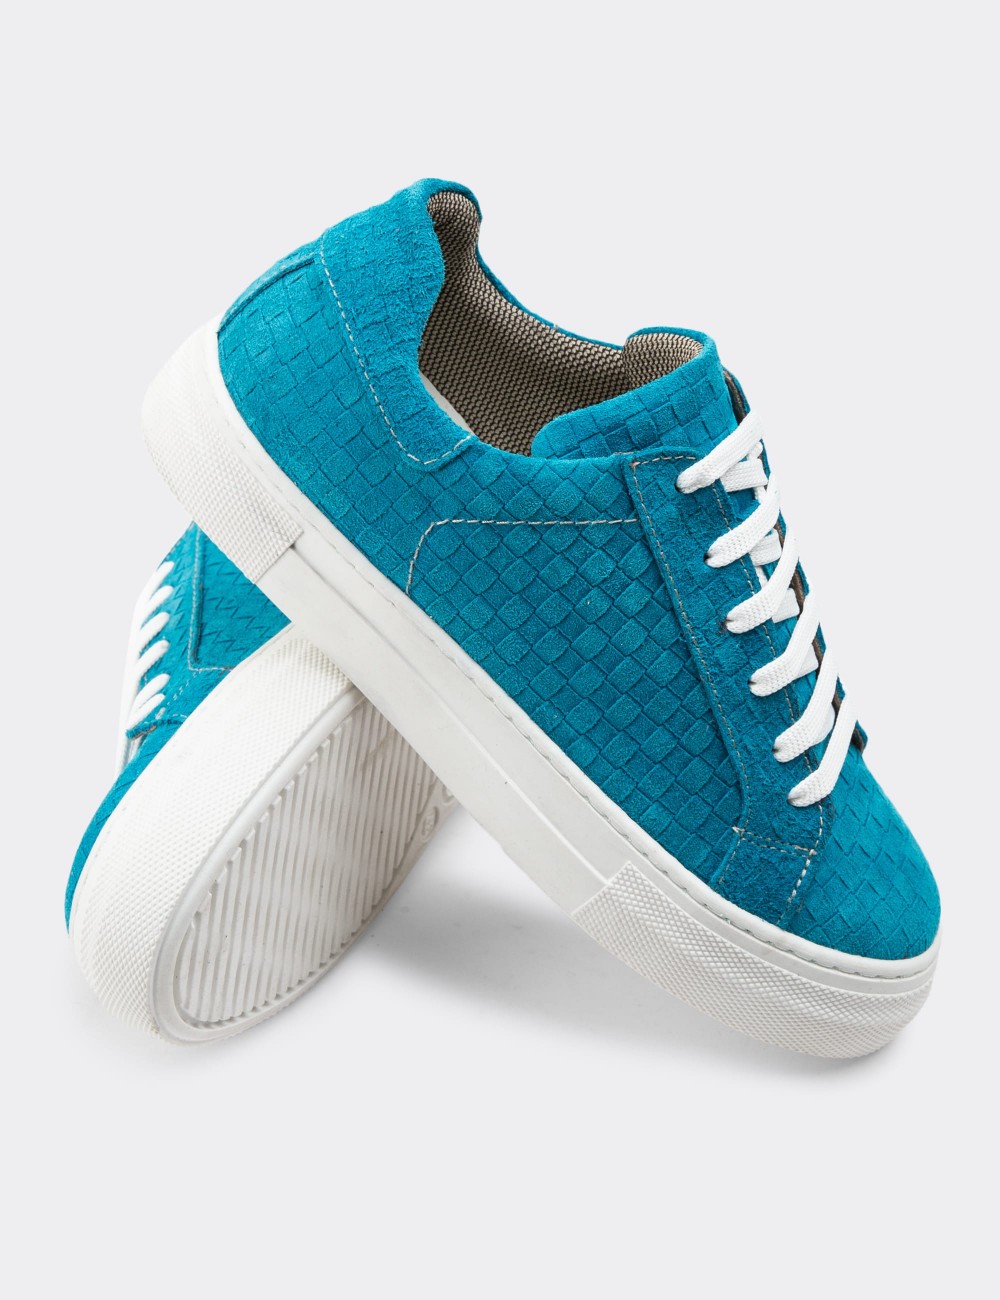 Turquoise Suede Leather Sneakers - Z1681ZTRKC03